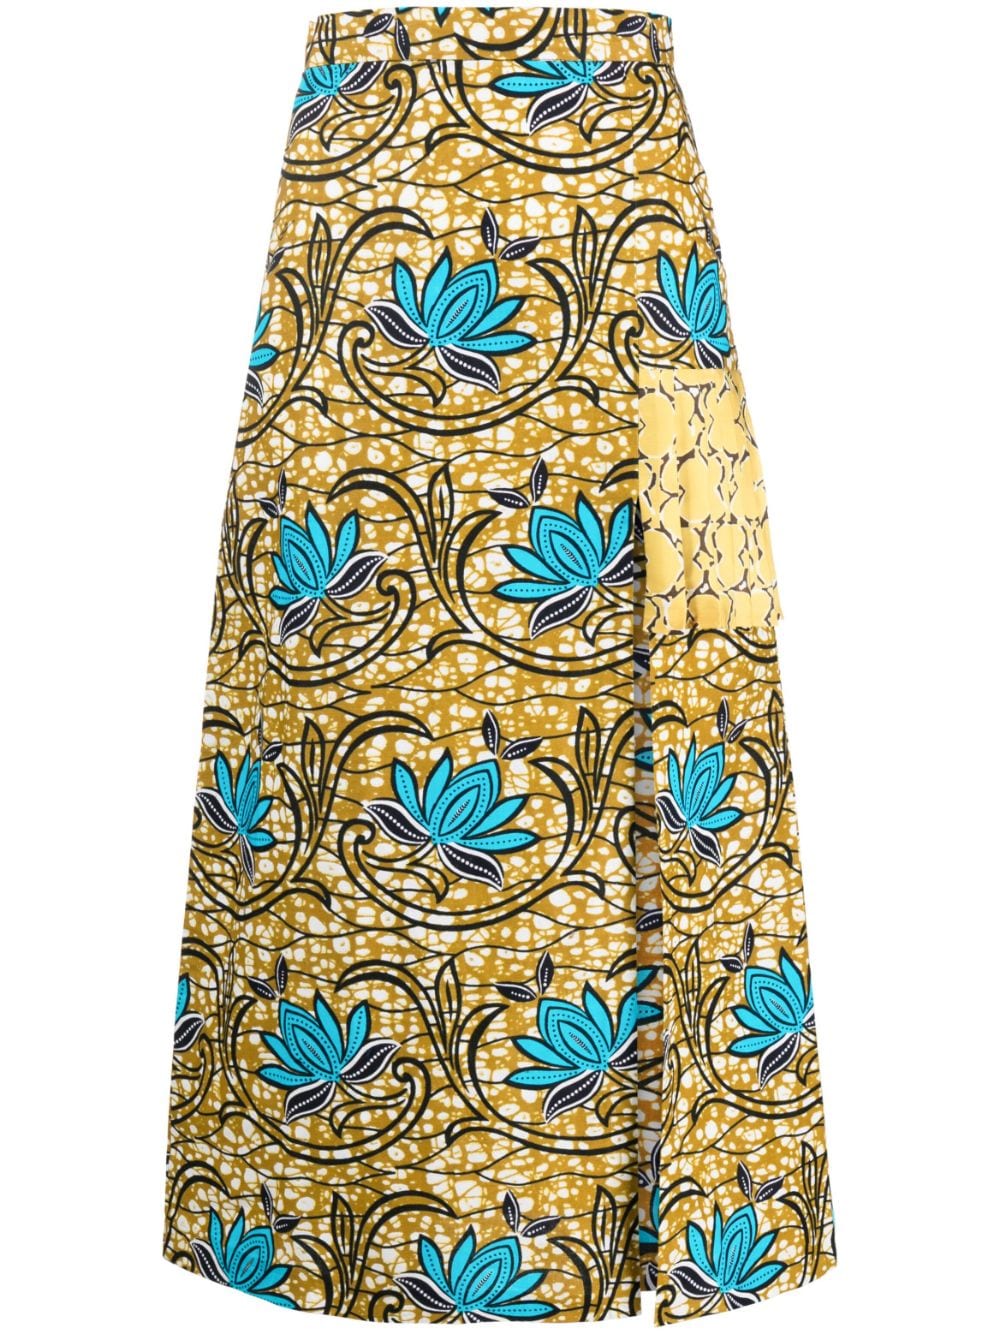 There Was One x Lisa Folawiyo floral-print cotton skirt - Yellow von There Was One